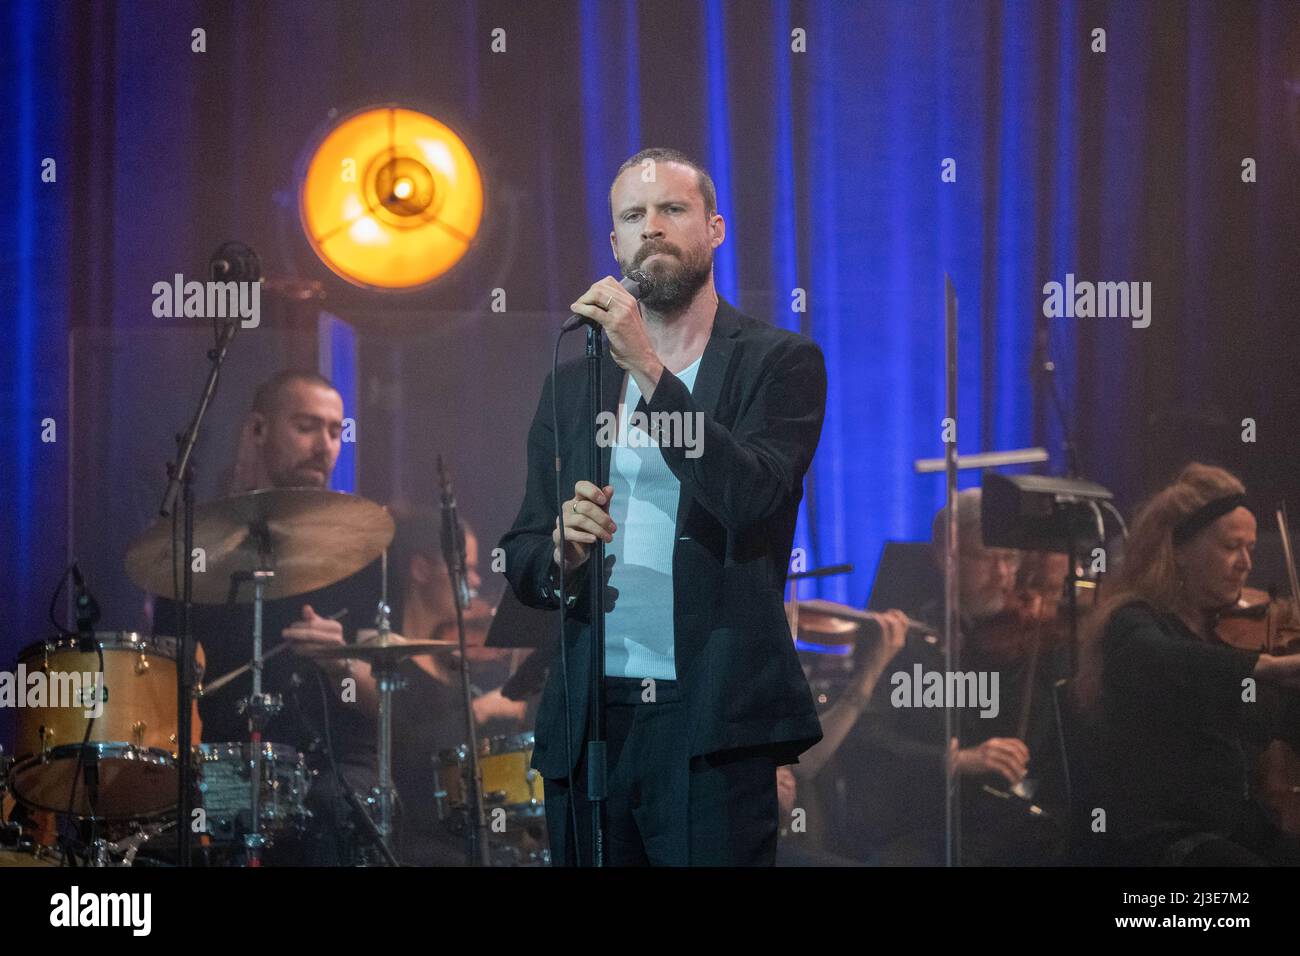 London, UK. April 7th, 2022. Father John Misty performing live on stage at The Barbican in London. Photo: Richard Gray/Alamy Stock Photo